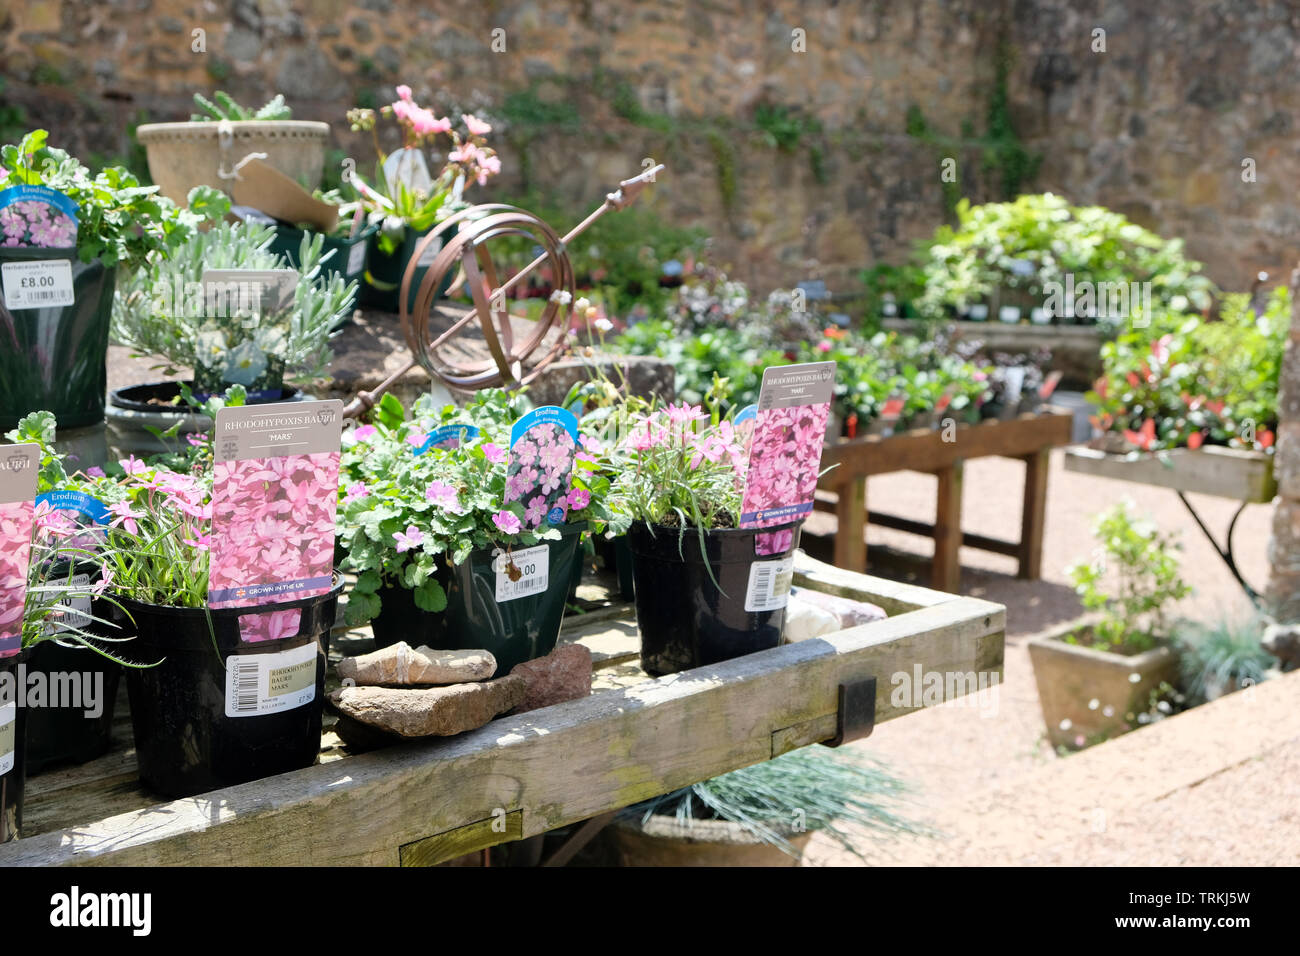 June 2019. Potted flowers for sale, including rhodohypoxis baurii, erodium and dahlias. Stock Photo